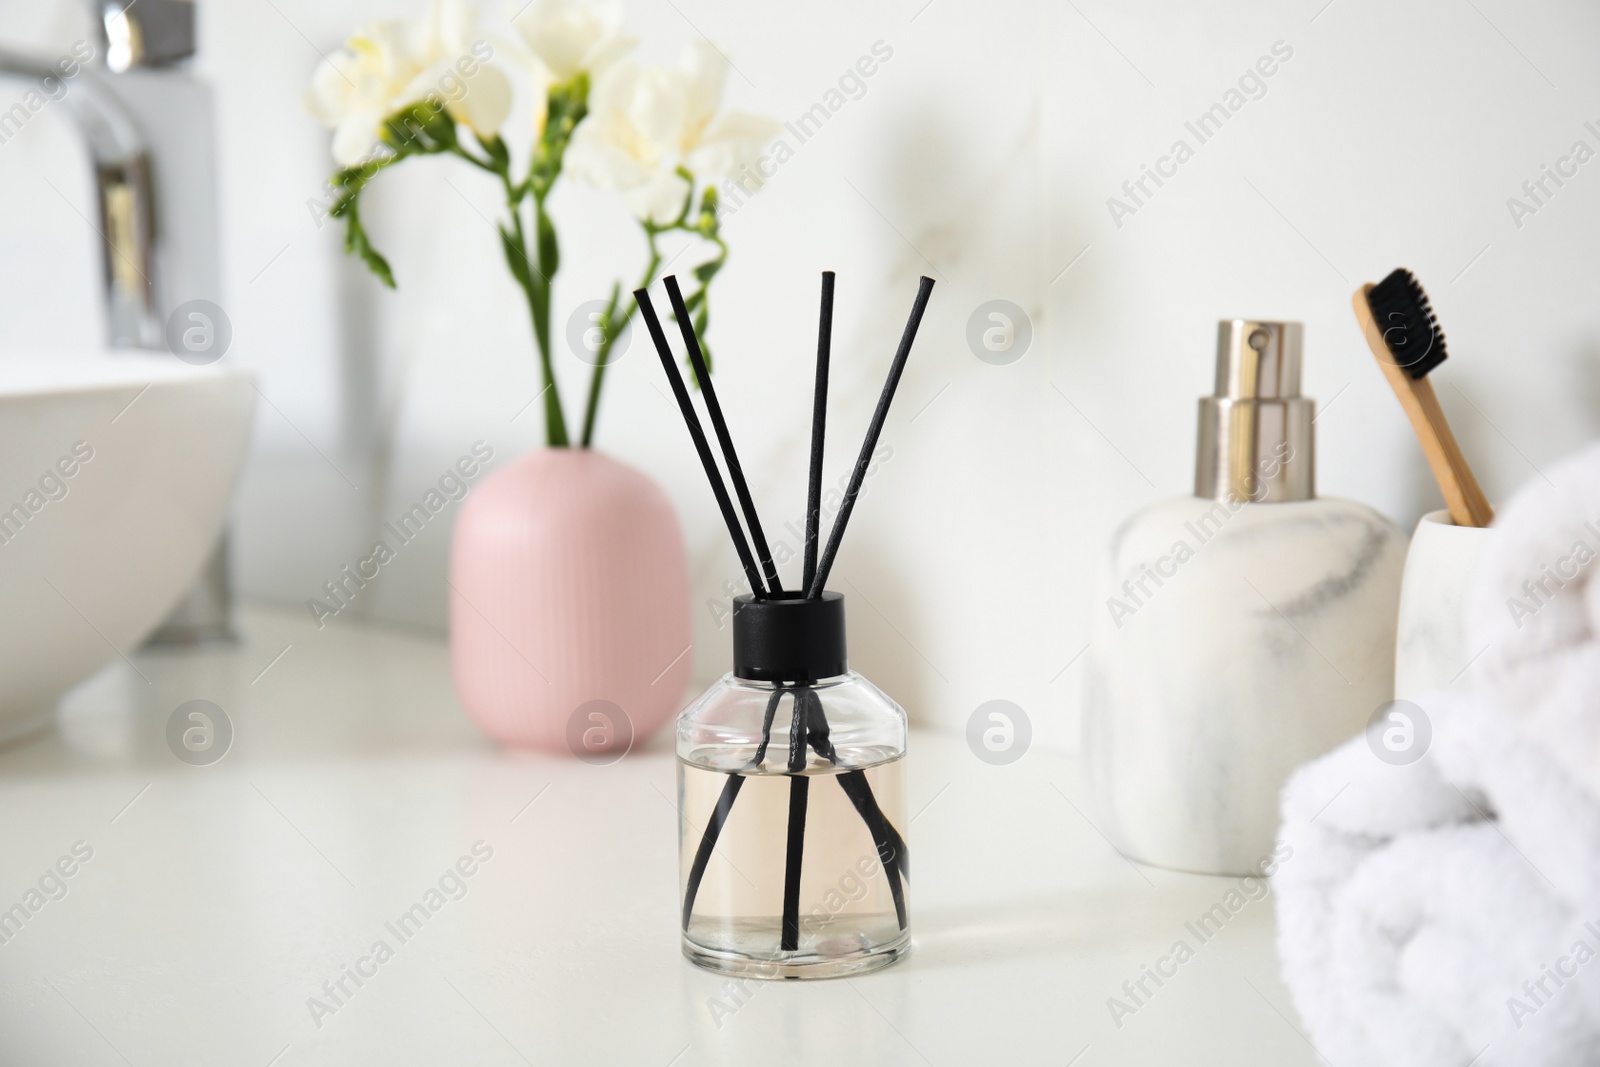 Photo of Aromatic reed air freshener, toiletries and flowers on white countertop in bathroom